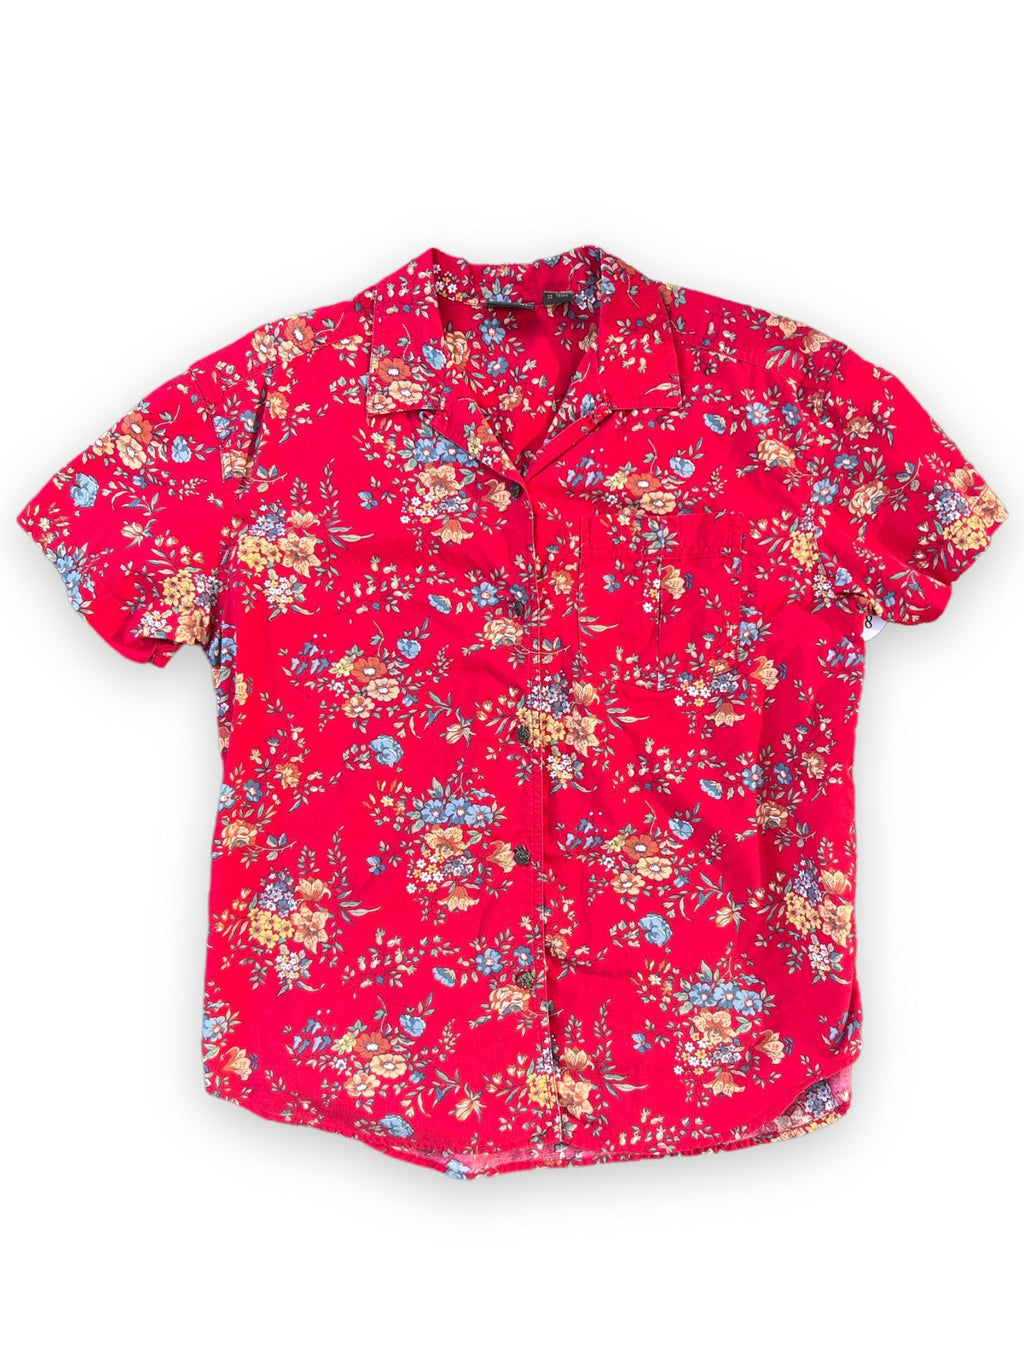 LIZWEAR RED FLORAL SHIRT